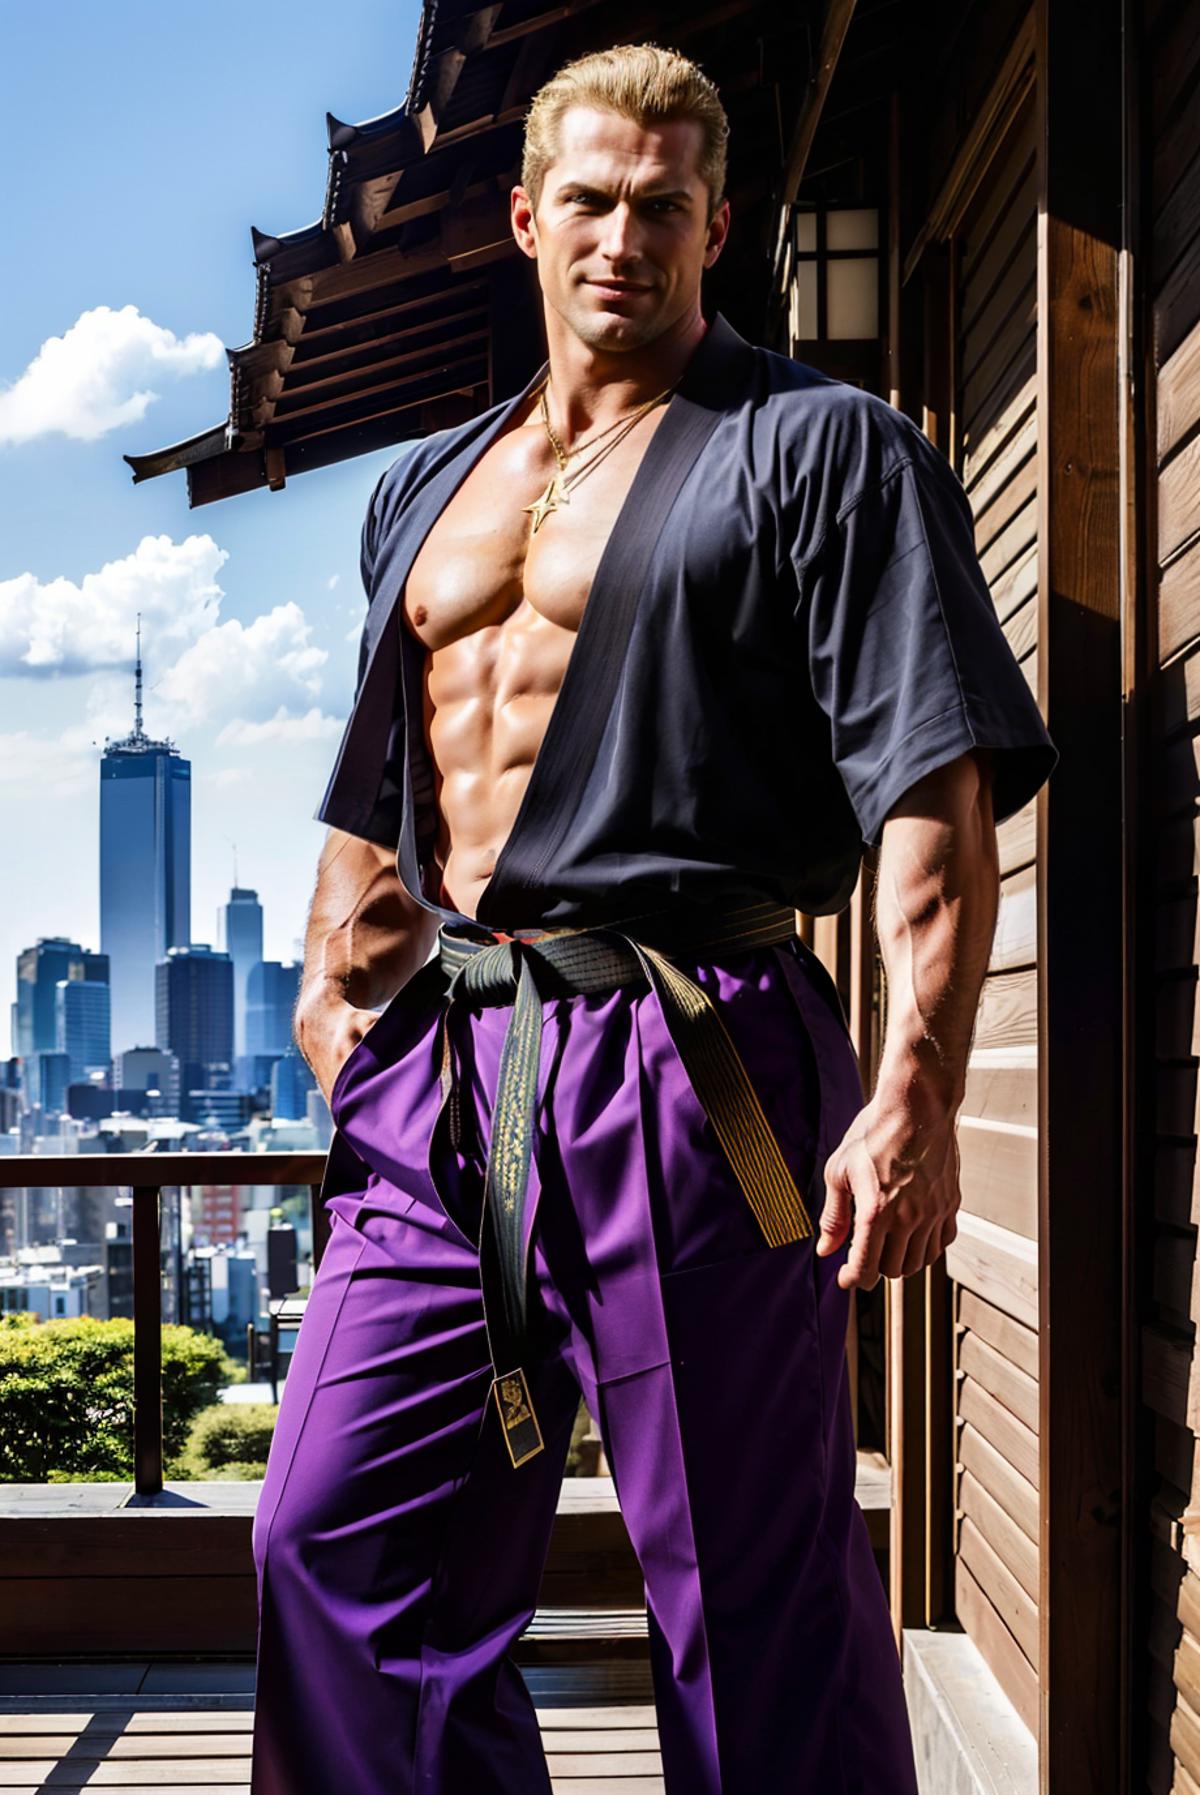 Geese Howard [The King of Fighters/Fatal Fury] image by wikkitikki